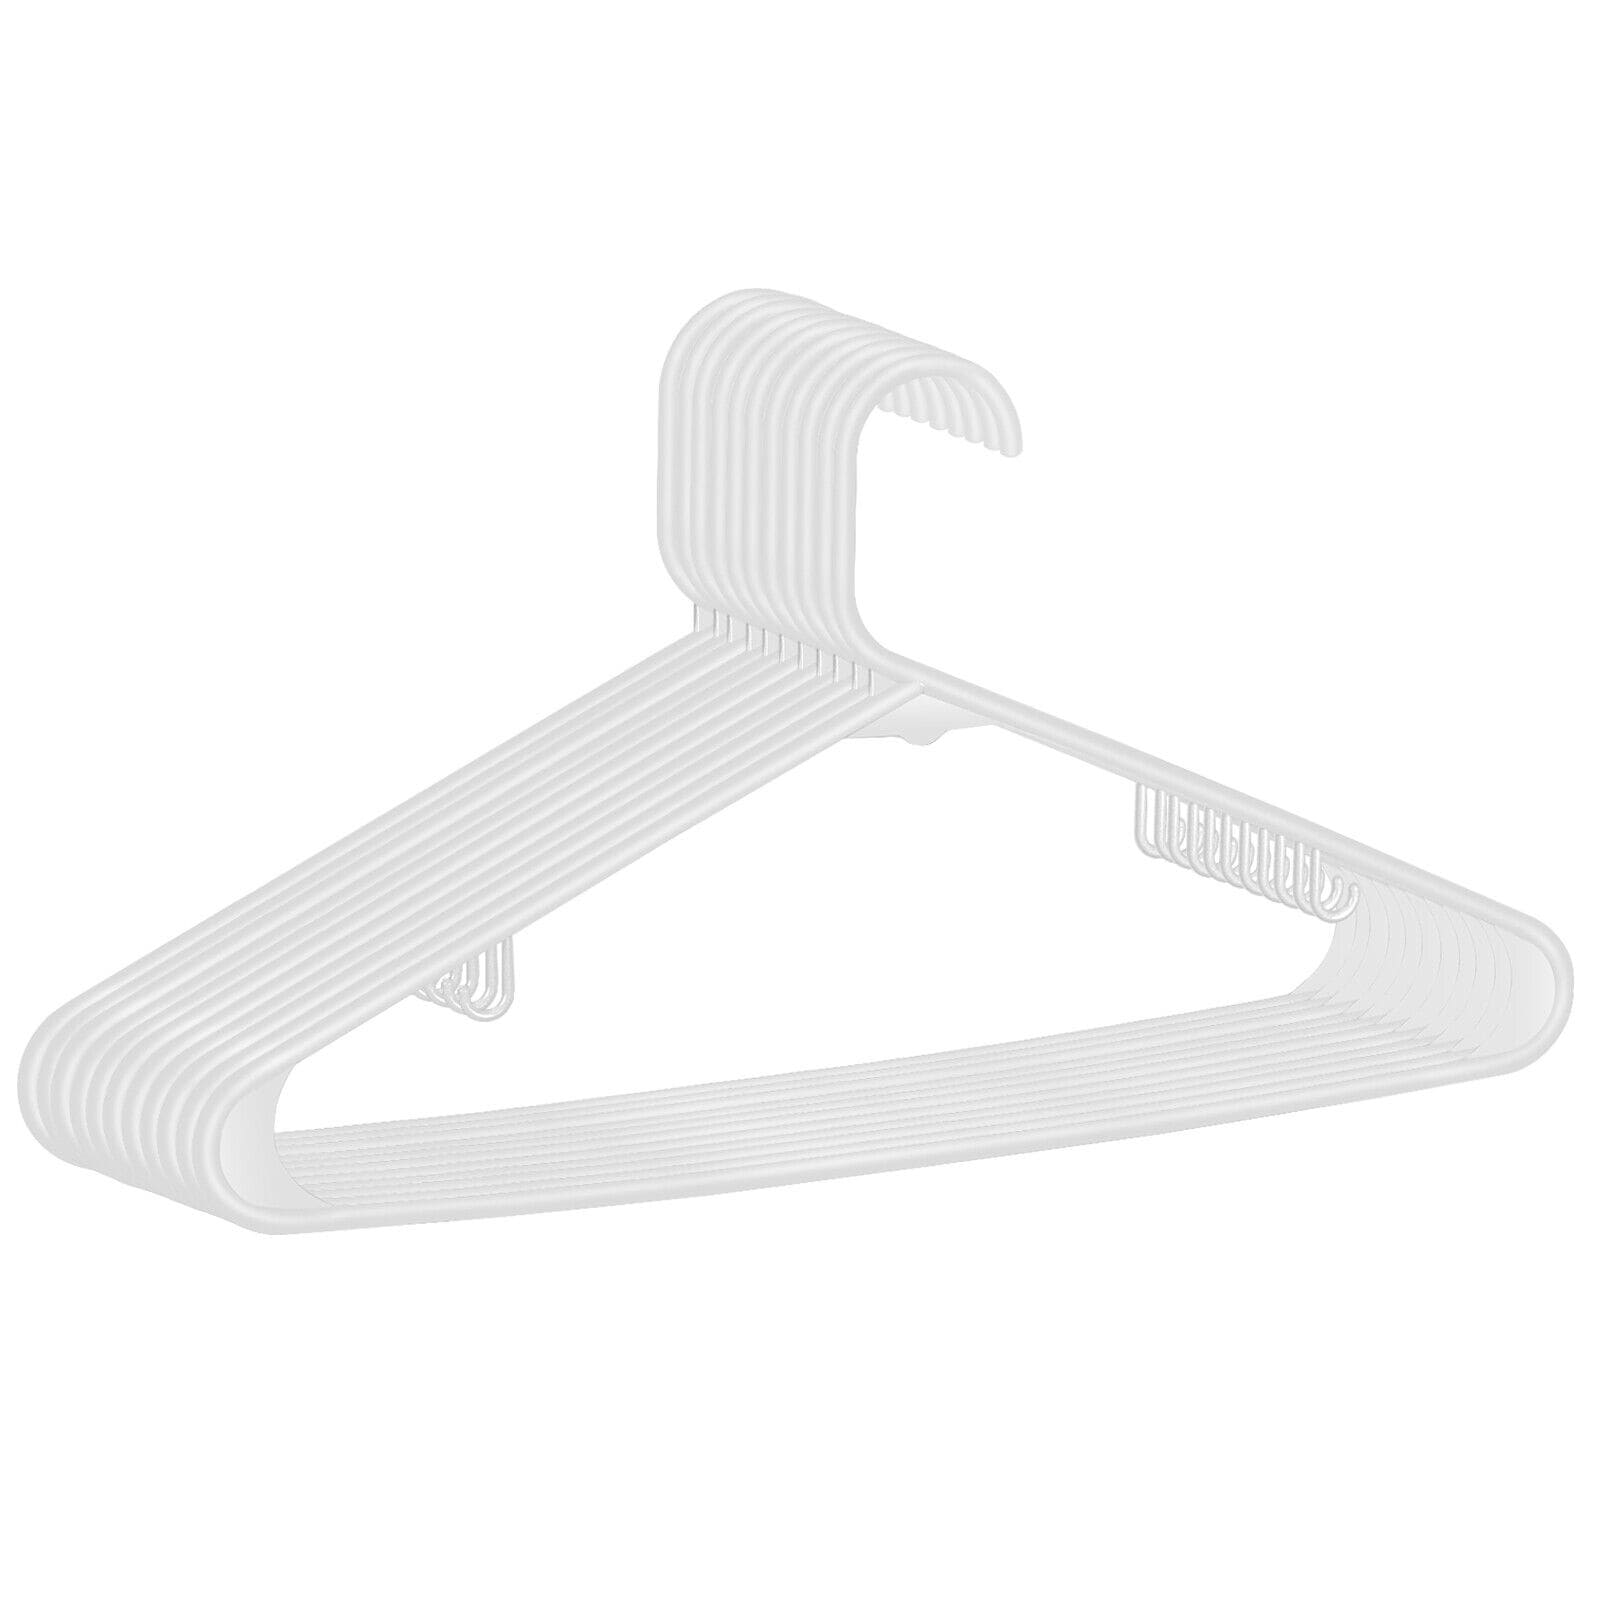 https://ak1.ostkcdn.com/images/products/is/images/direct/46417c776be3745f20e238ace04faddbb4ad68d6/100-Pack-White-Standard-Plastic-Clothes-Hangers.jpg